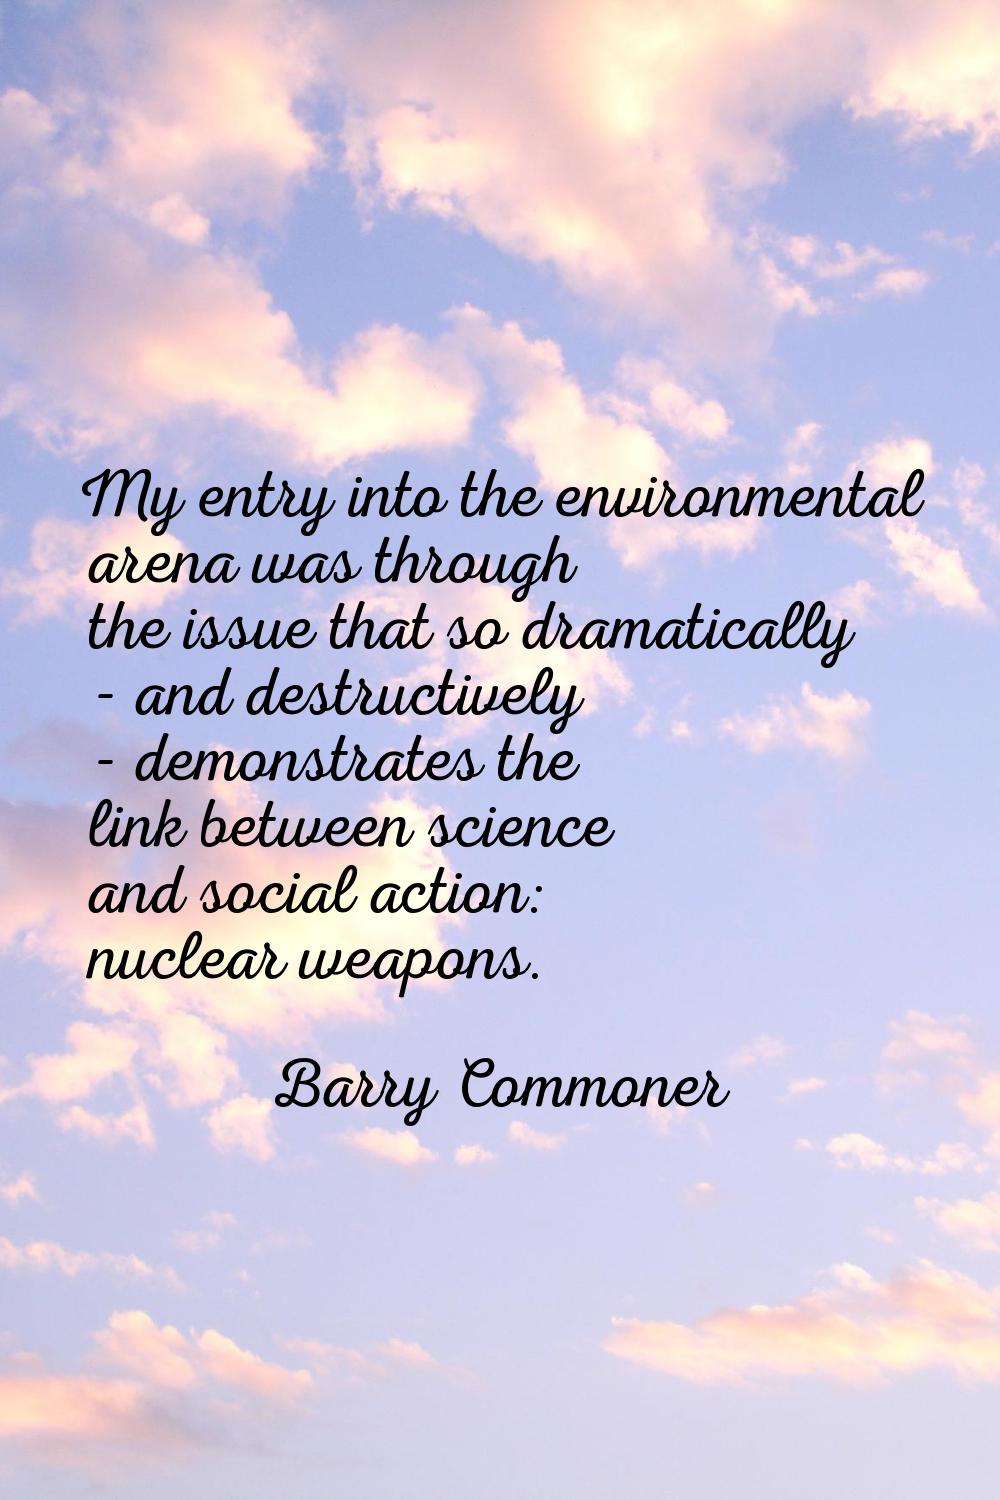 My entry into the environmental arena was through the issue that so dramatically - and destructivel